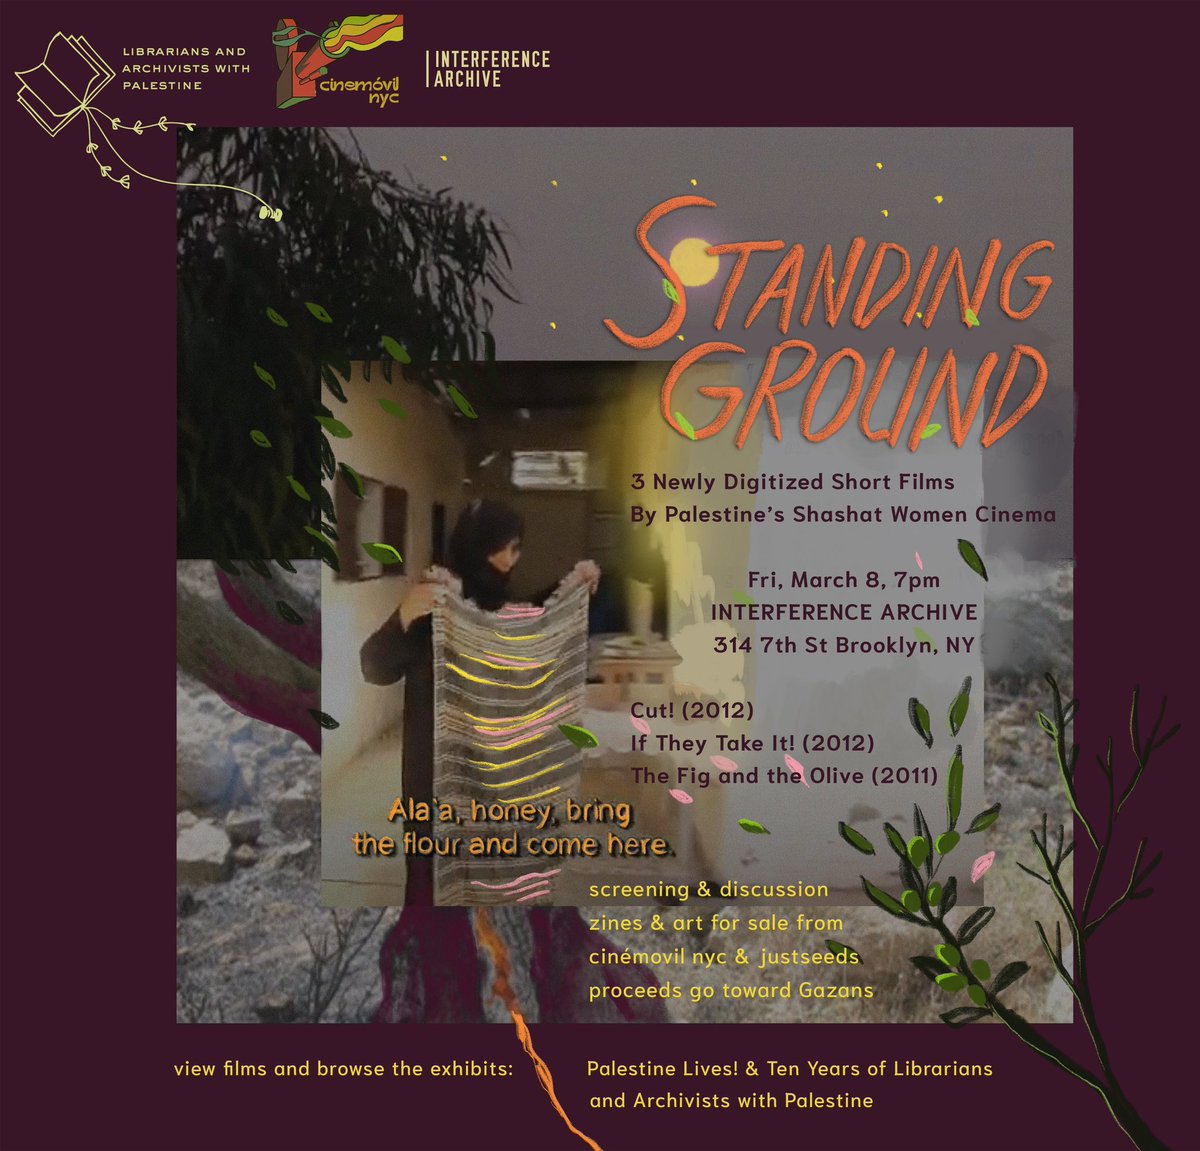 🌱STANDING GROUND 🌱 3 rare, newly digitized shorts by Shashat + hands on Palestine Lives! archive + horizontal discussion w/@InterferenceArc This FRIDAY, 7PM Very limited capacity, RSVP: docs.google.com/forms/d/e/1FAI…